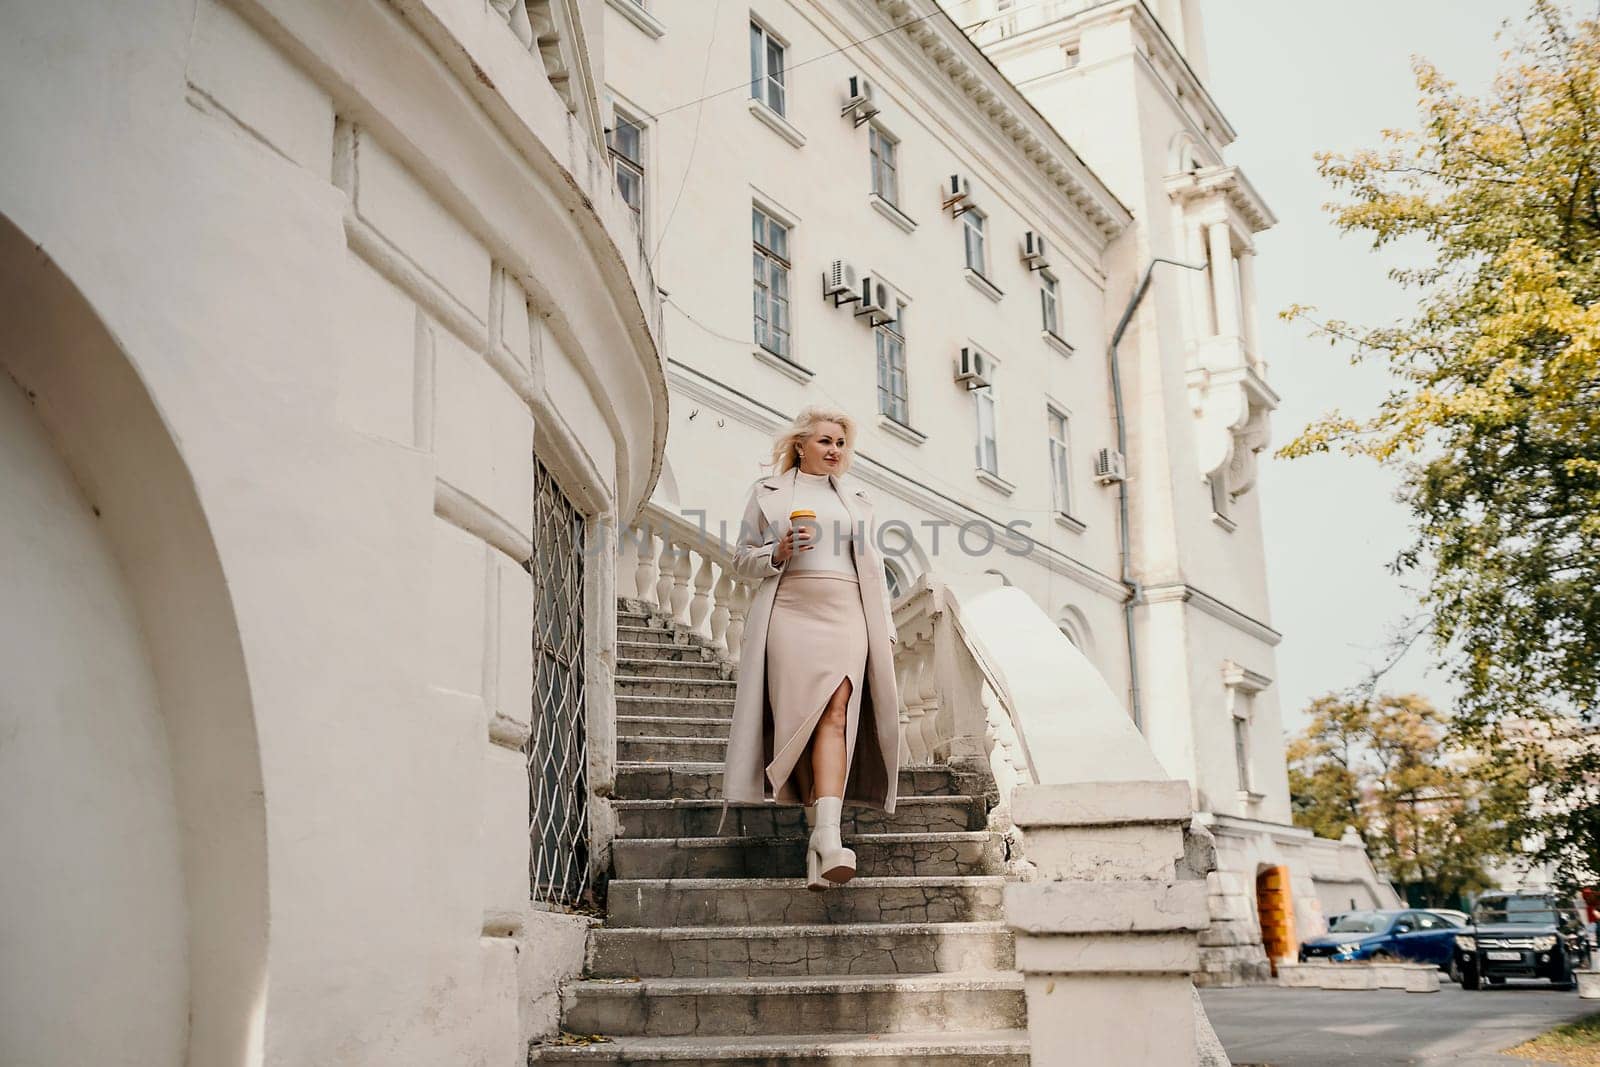 A woman in a white dress is walking up a set of stairs. She is holding a cup in her hand. The scene is set in front of a large white building with a balcony. by Matiunina